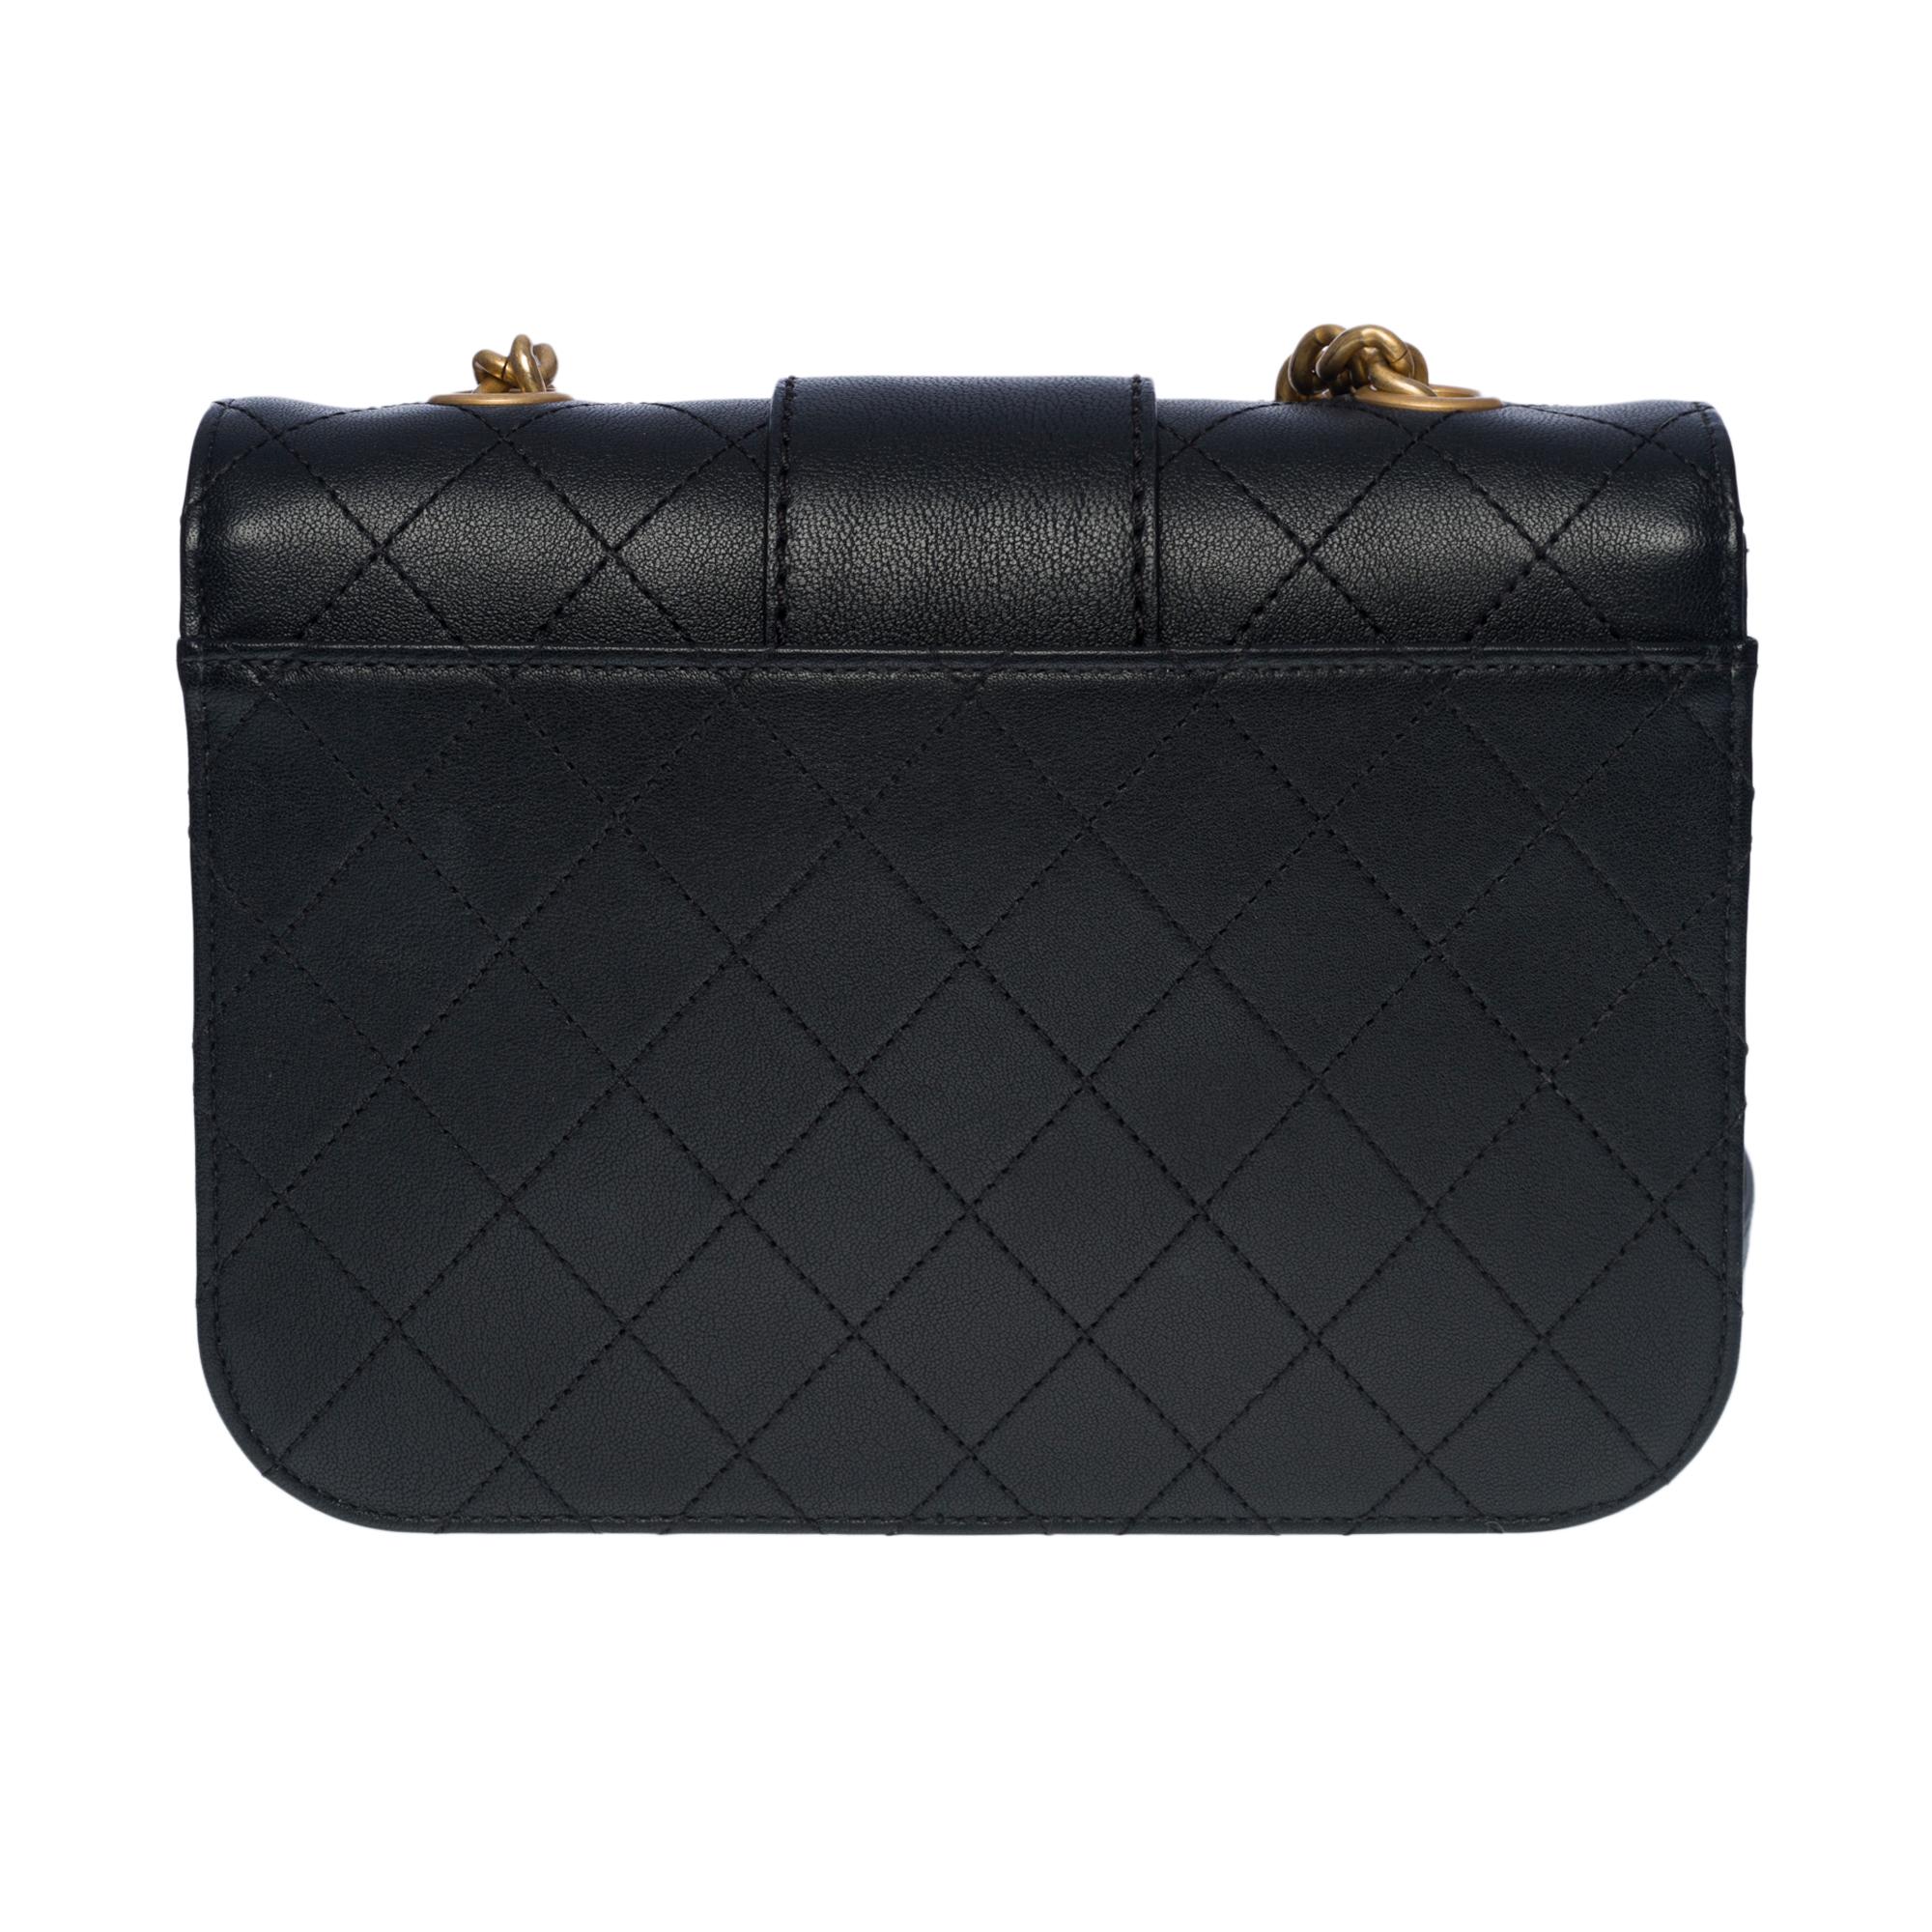 Black Limited Edition Chanel Classic shoulder flap bag in black calf leather, GHW